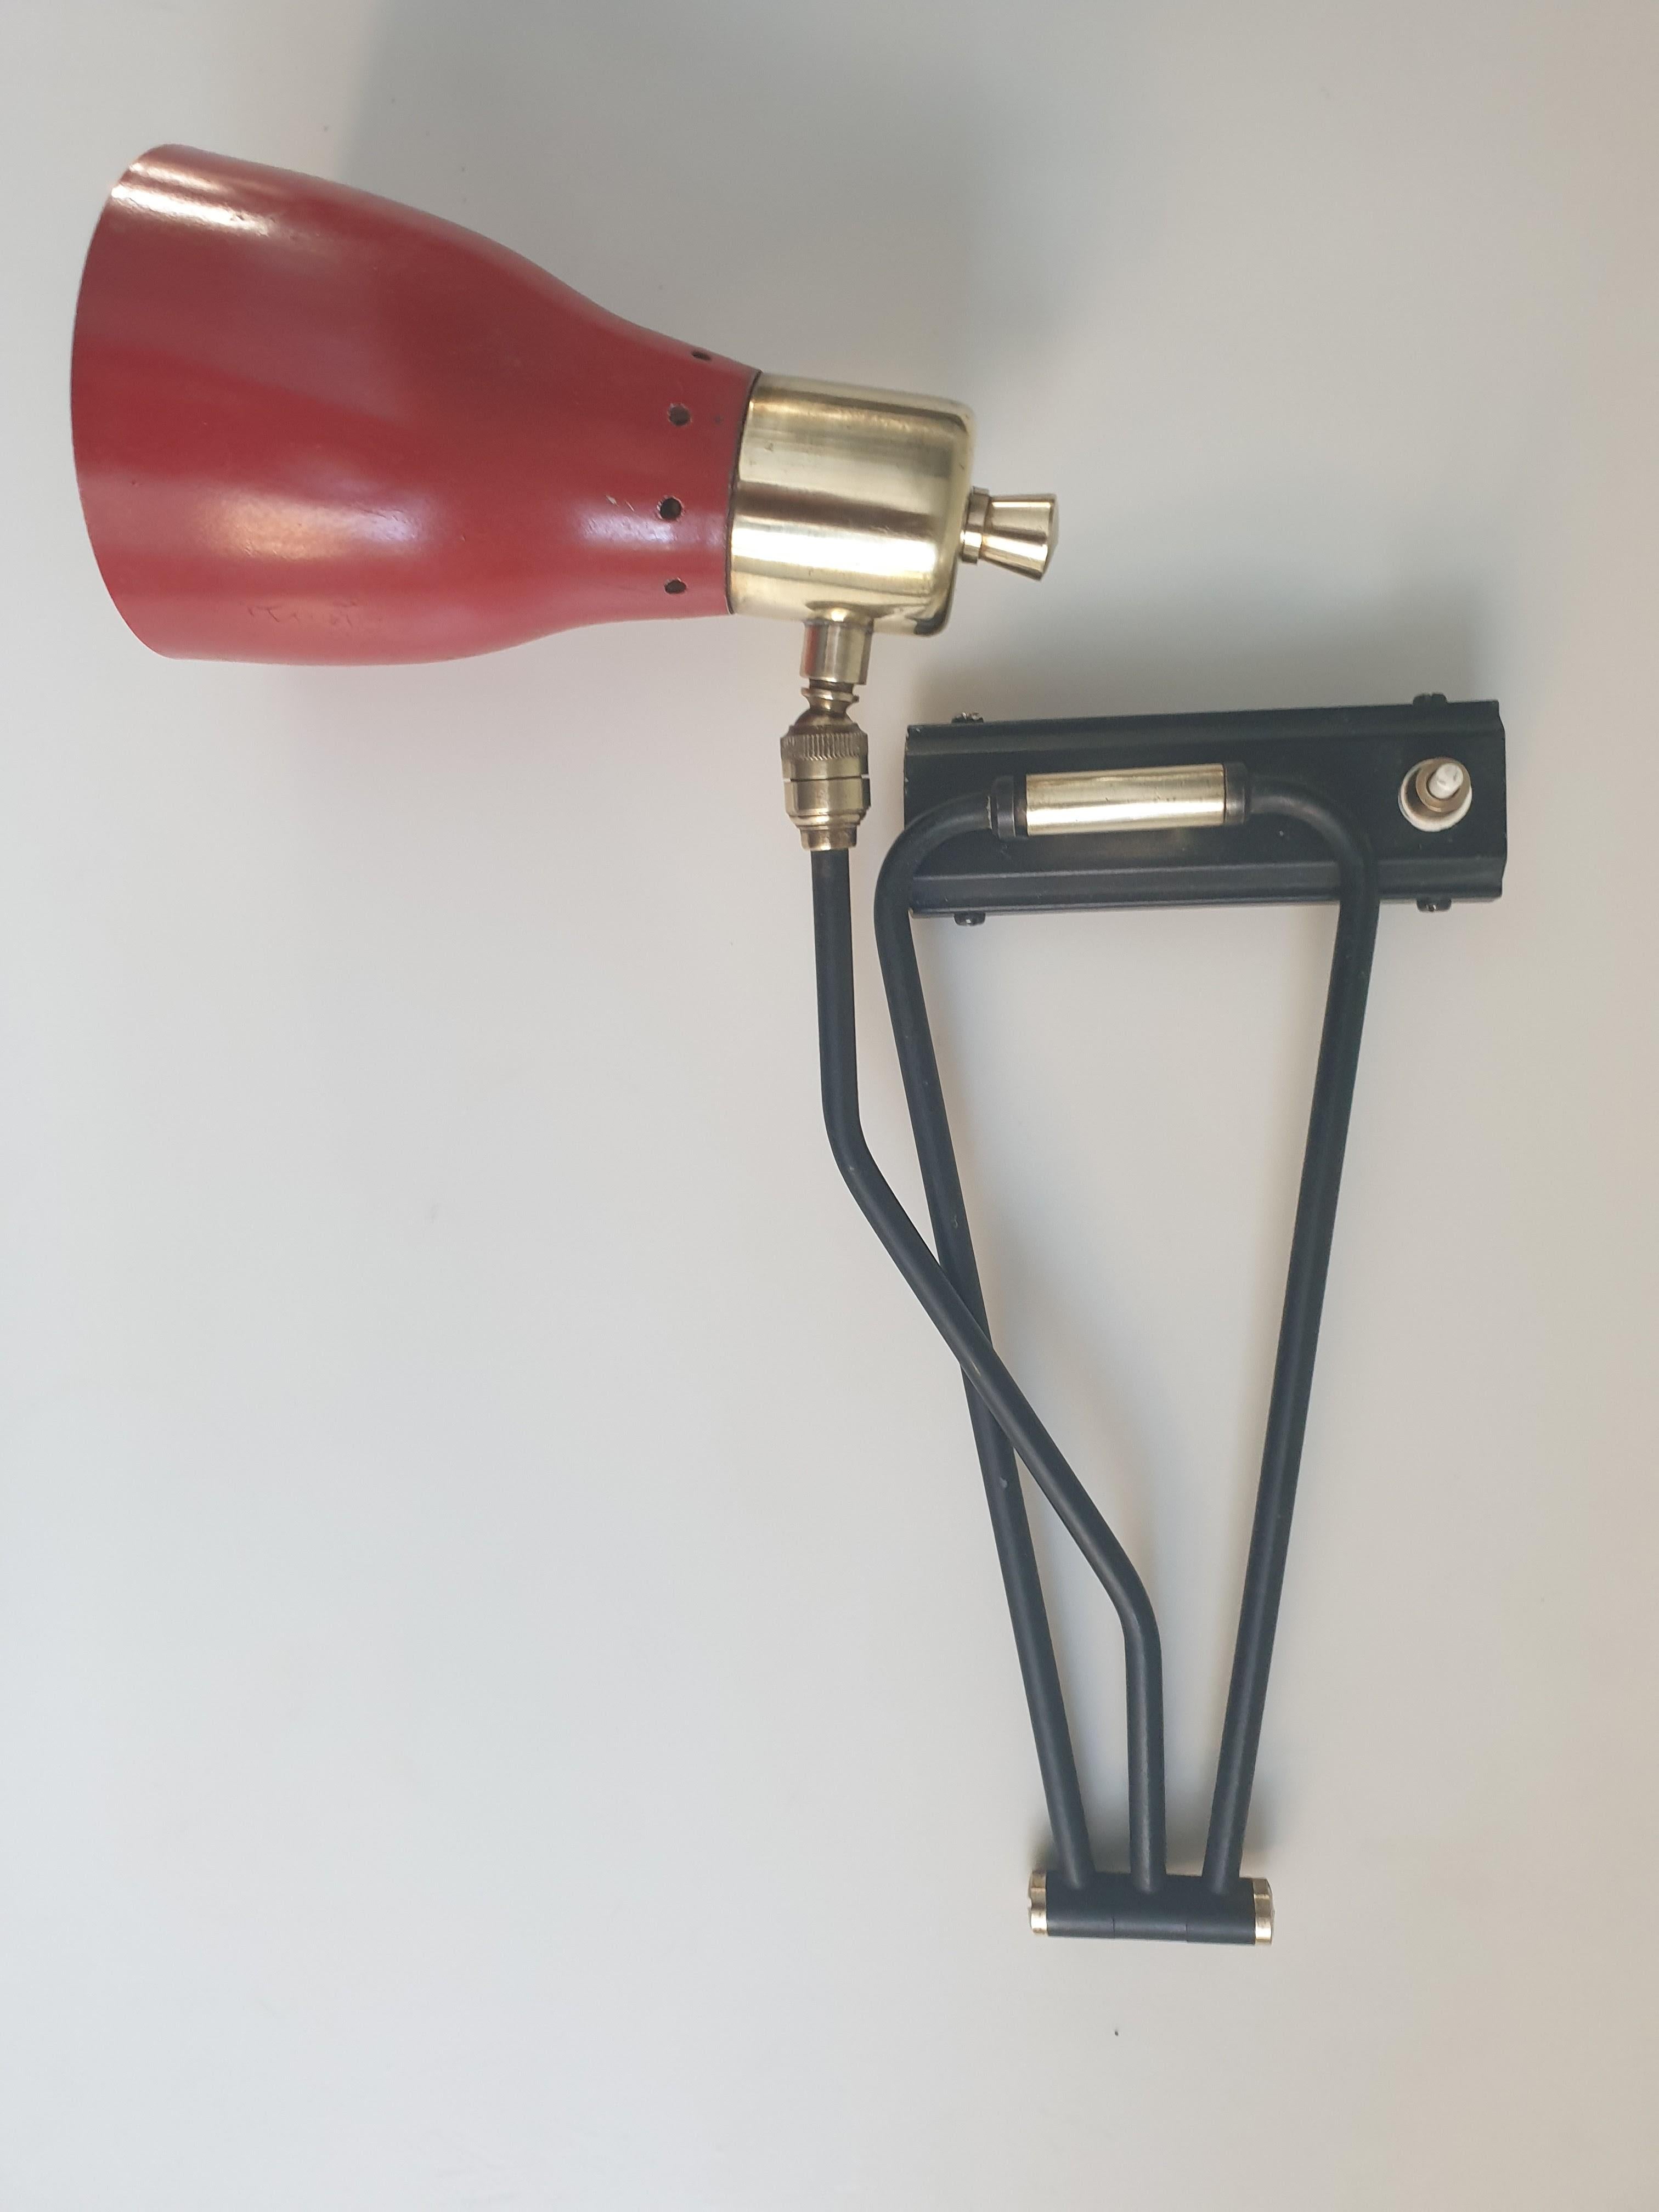 Simple industrial style wallight attributed to the well known Italian designer, Luigi Caccia Dominioni and probably made for Azucena. The red aluminium shade has its original paint finish in good condition, unusual for a wallight of this age, as has